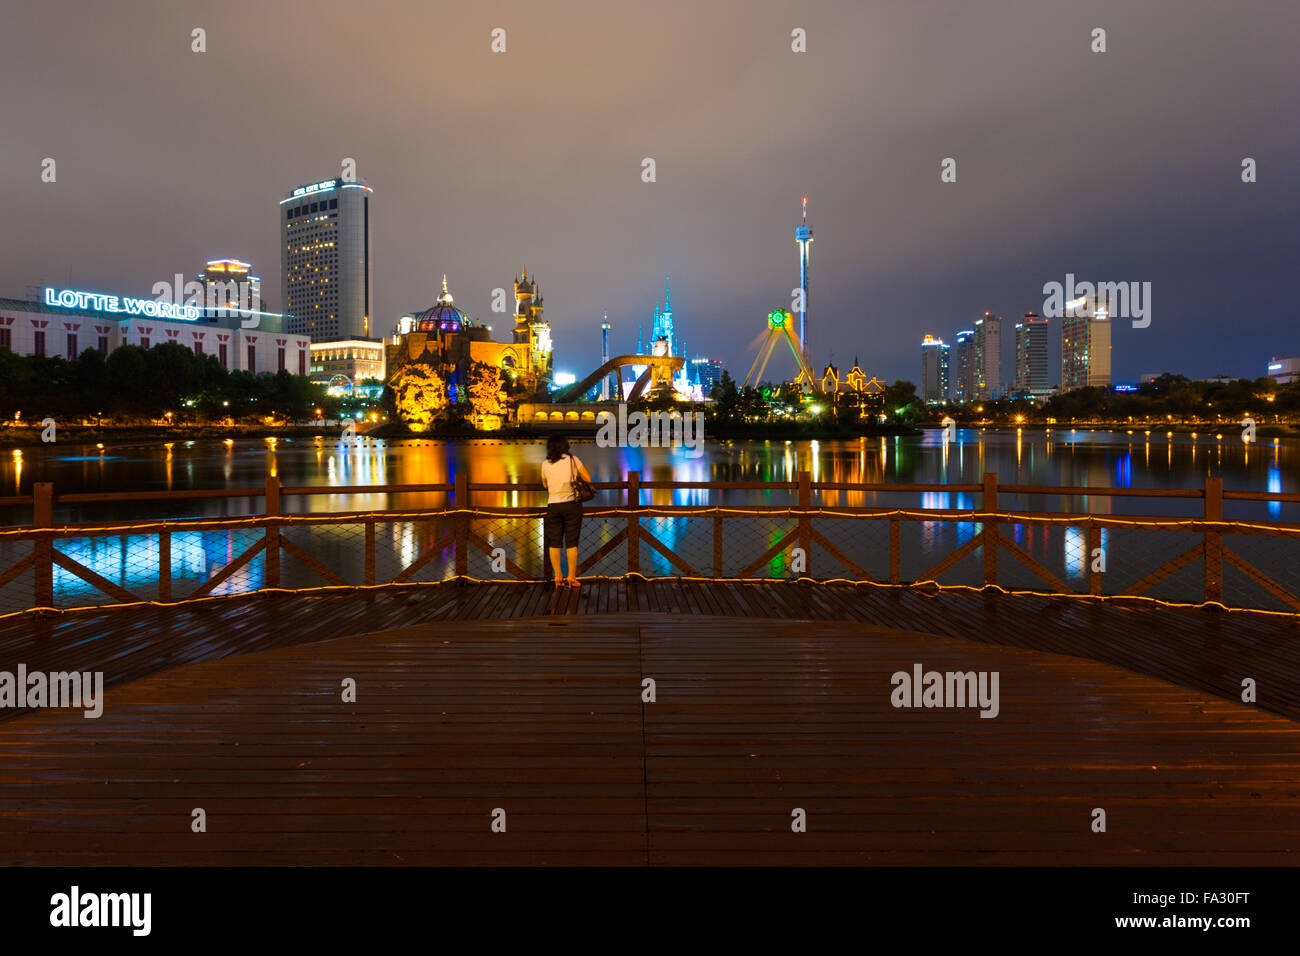 Korean woman standing on a wooden deck looking at the night lights lake water reflection at Lotte World amusement park in Seoul, Stock Photo